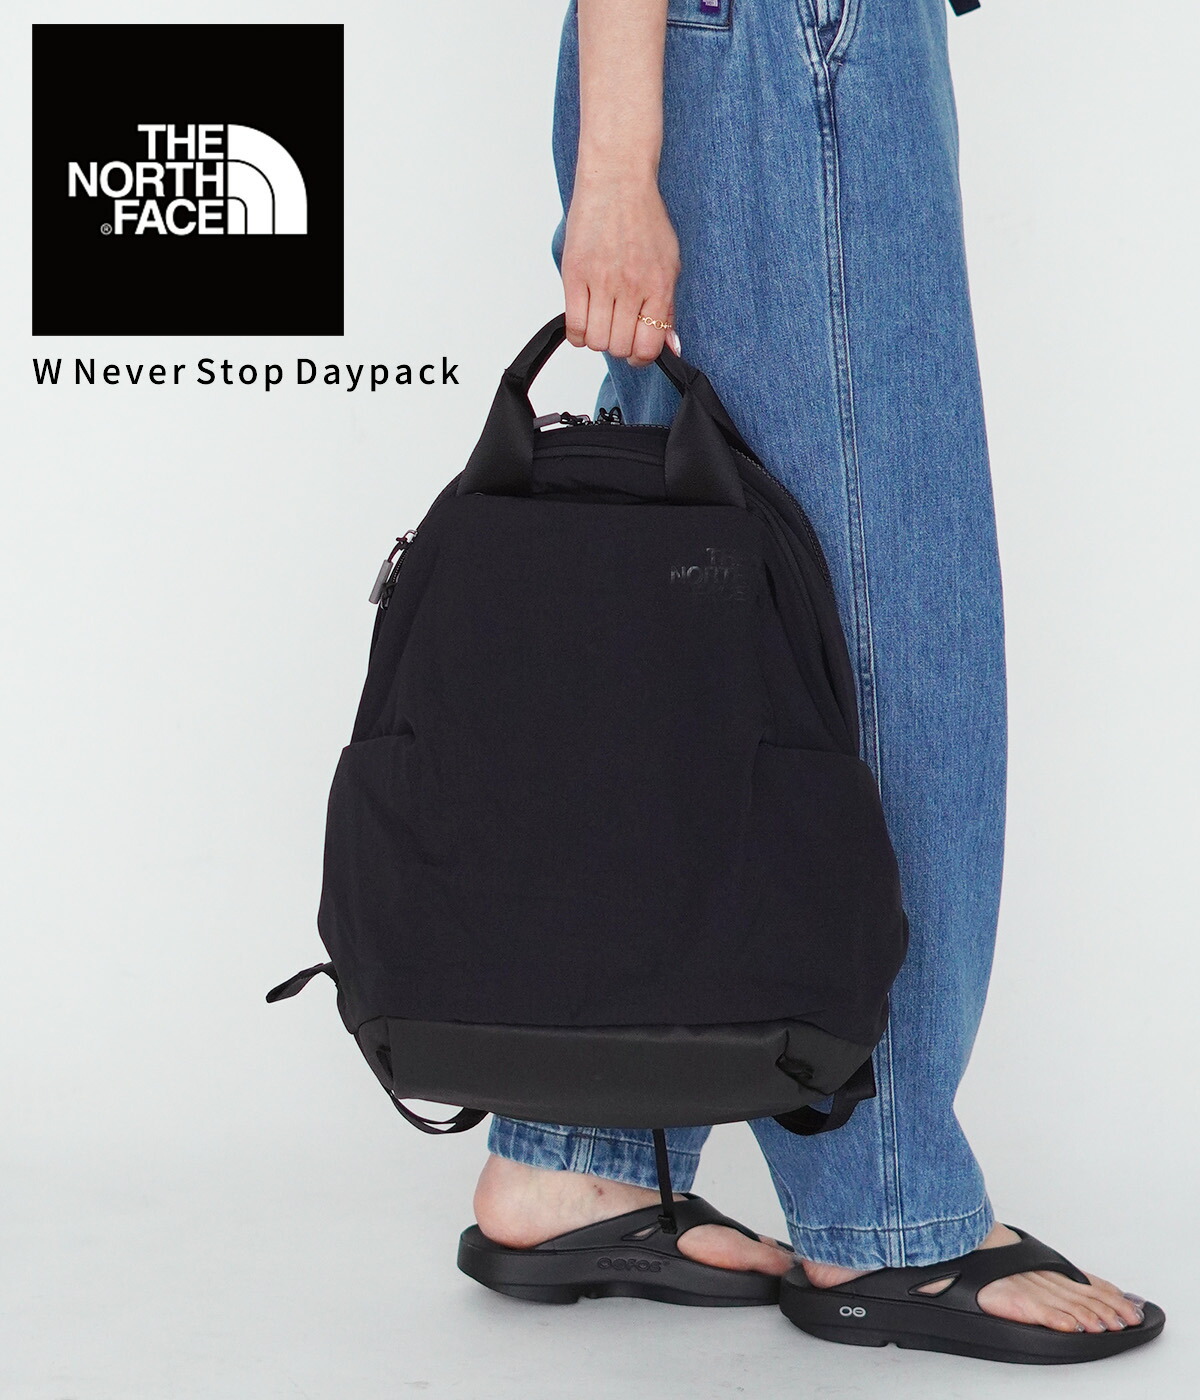 THE NORTH FACE / ザ ノースフェイス ： W Never Stop Daypack ...